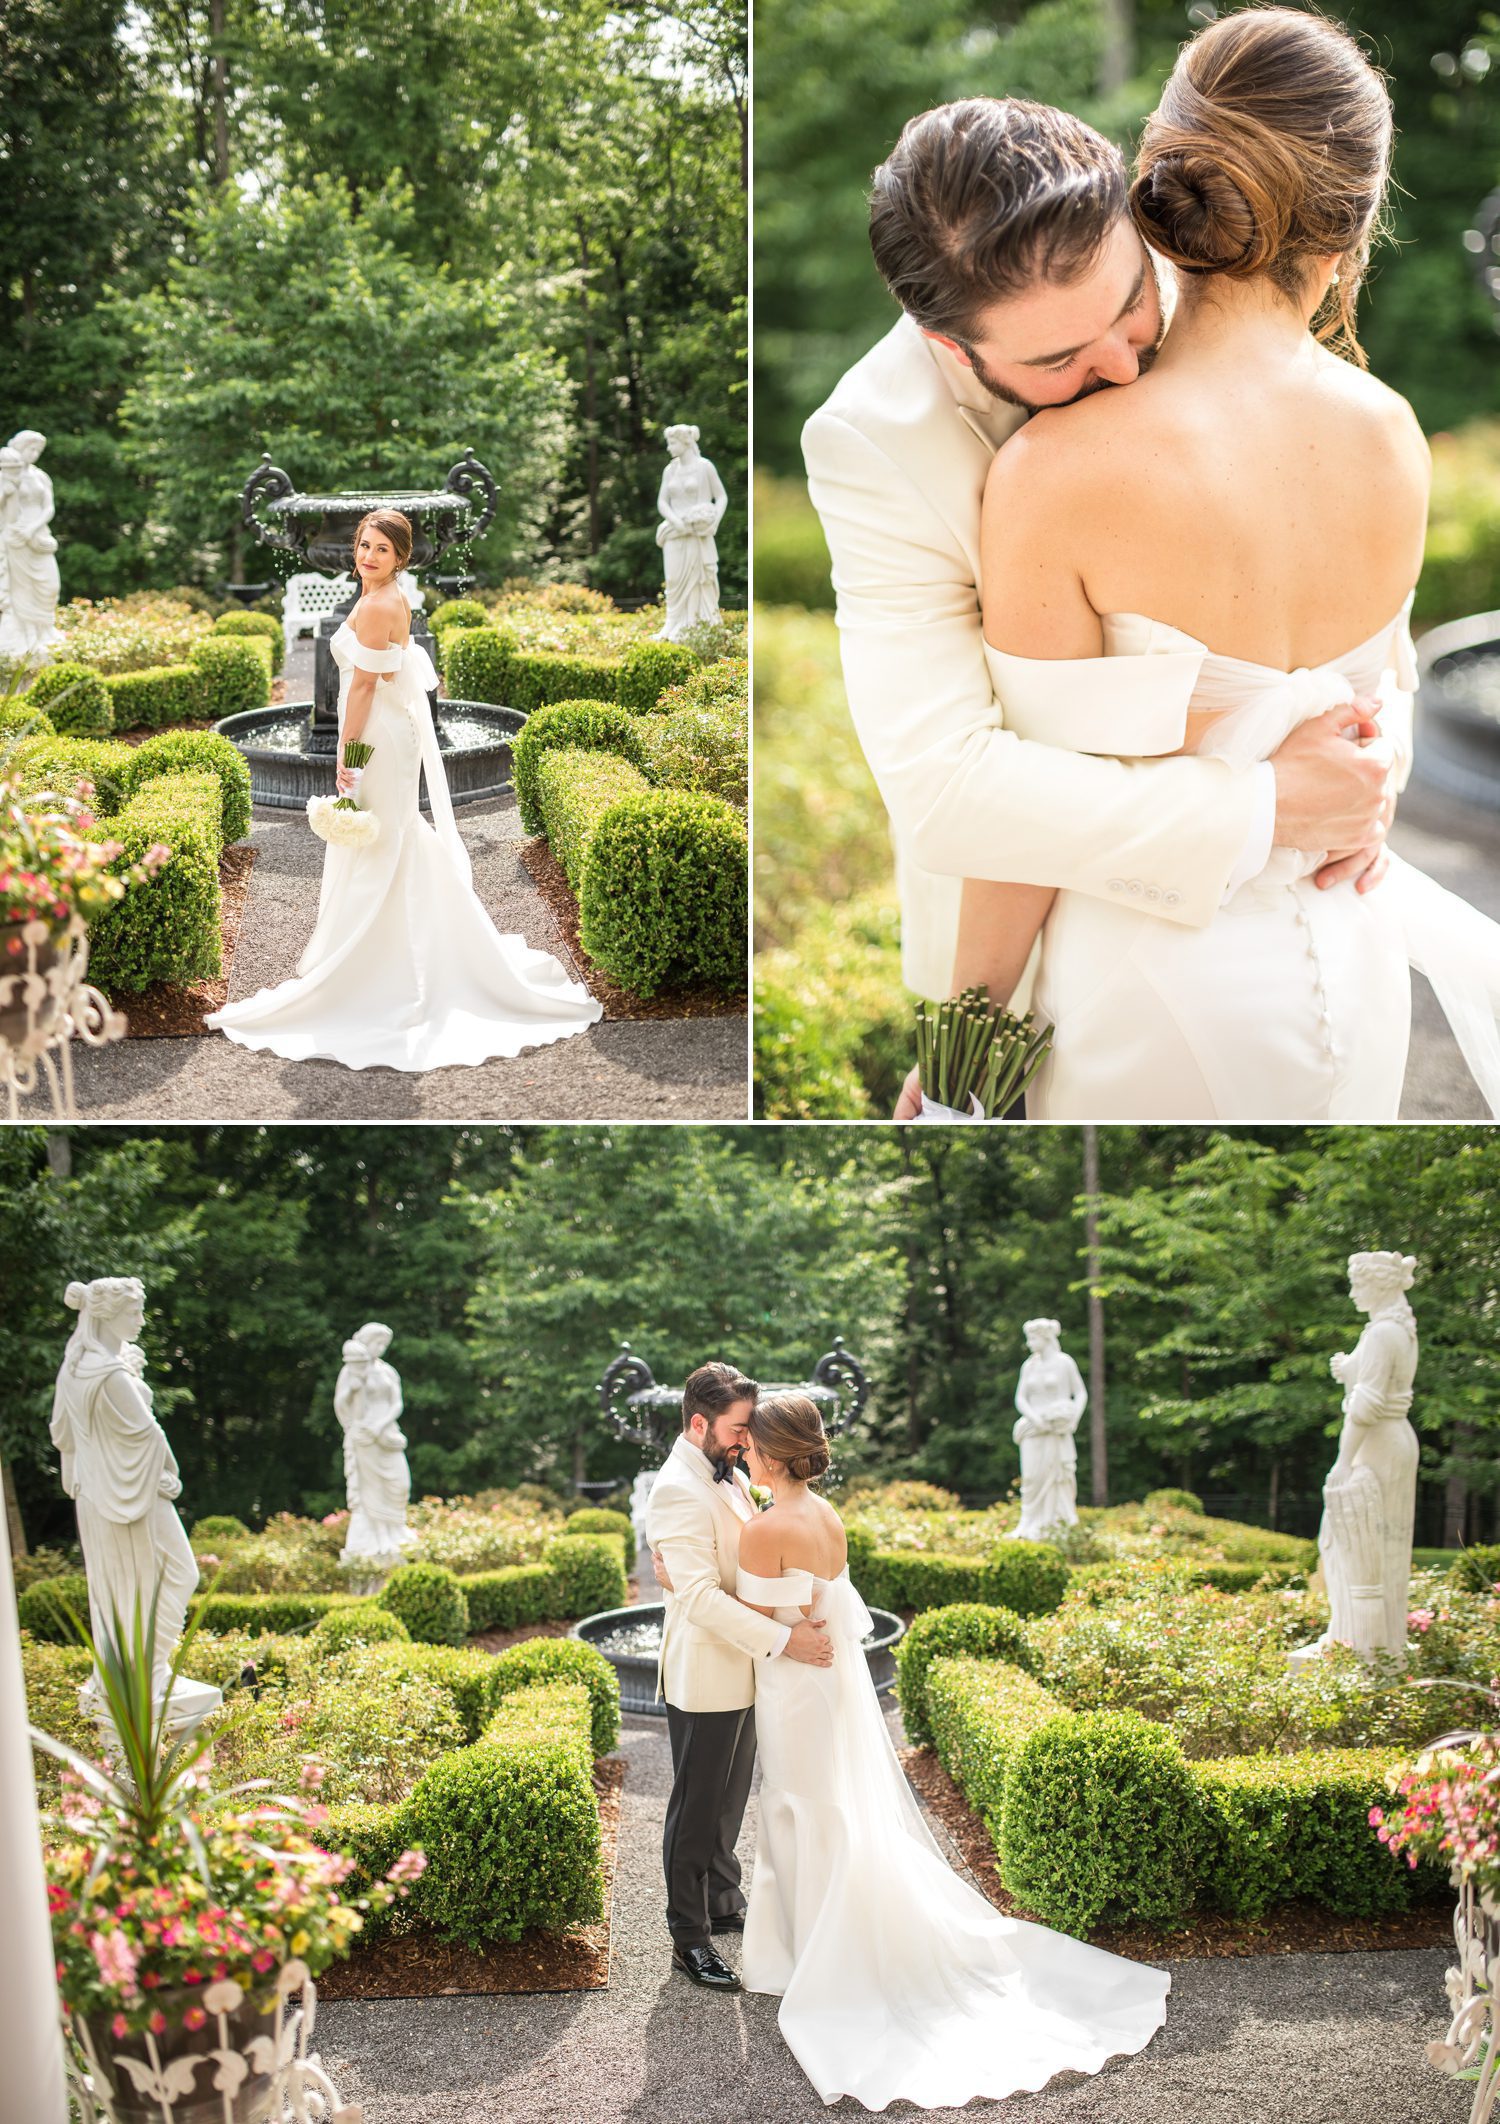 Private Estate Wedding Franklin, TN Bride and Groom Portrait in Garden with Statues